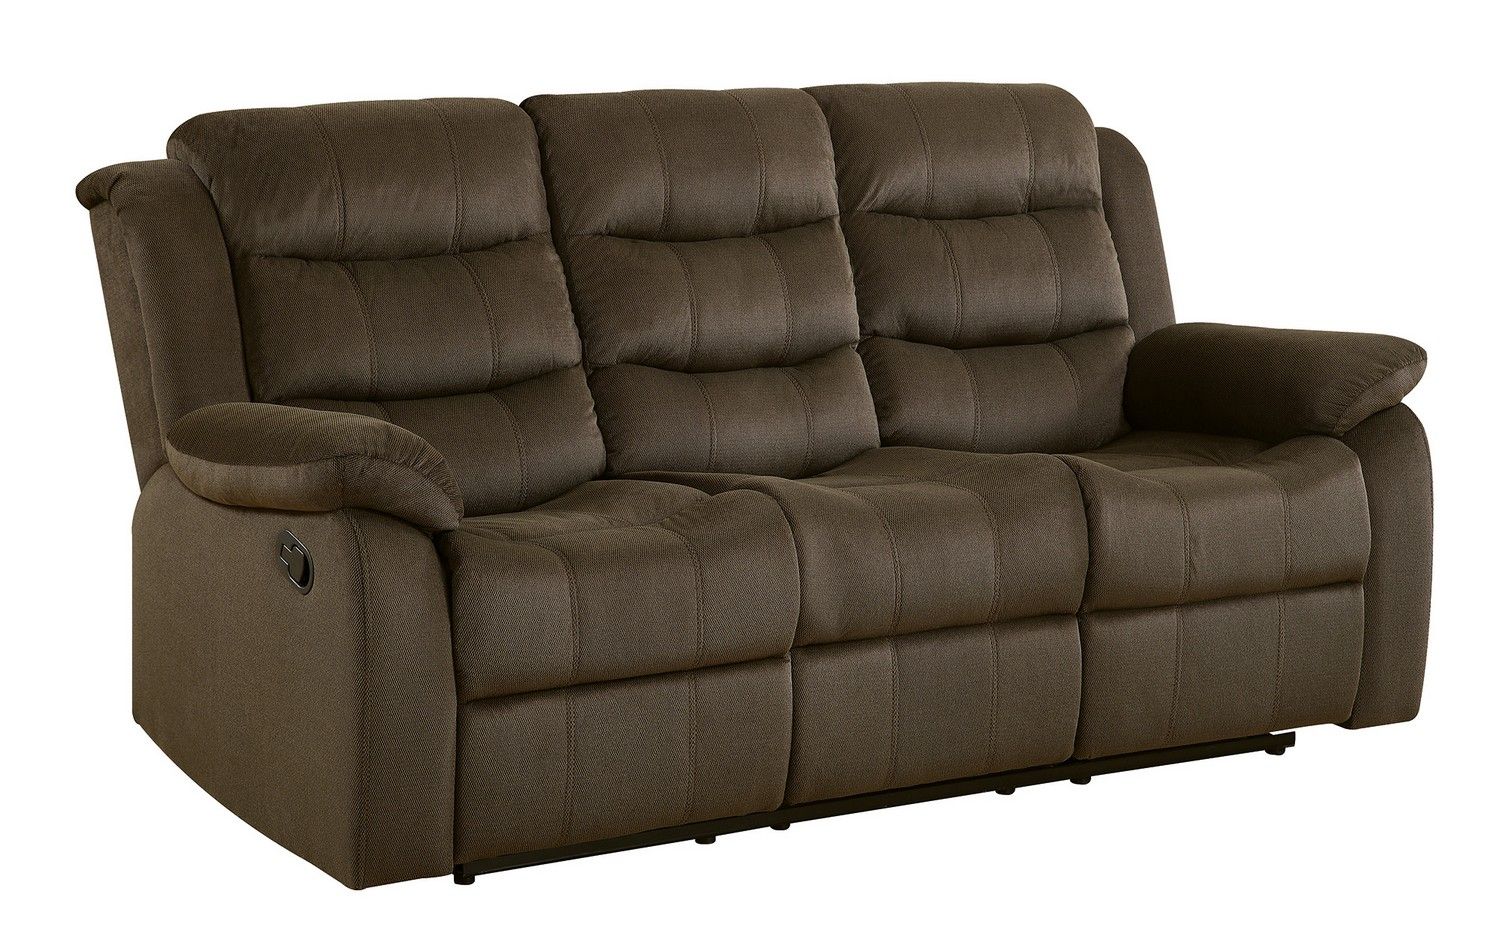 Coaster Rodman Reclining Sofa – Two Tone Chocolate 601881 At Homelement In 2 Tone Chocolate Microfiber Sofas (Gallery 7 of 20)